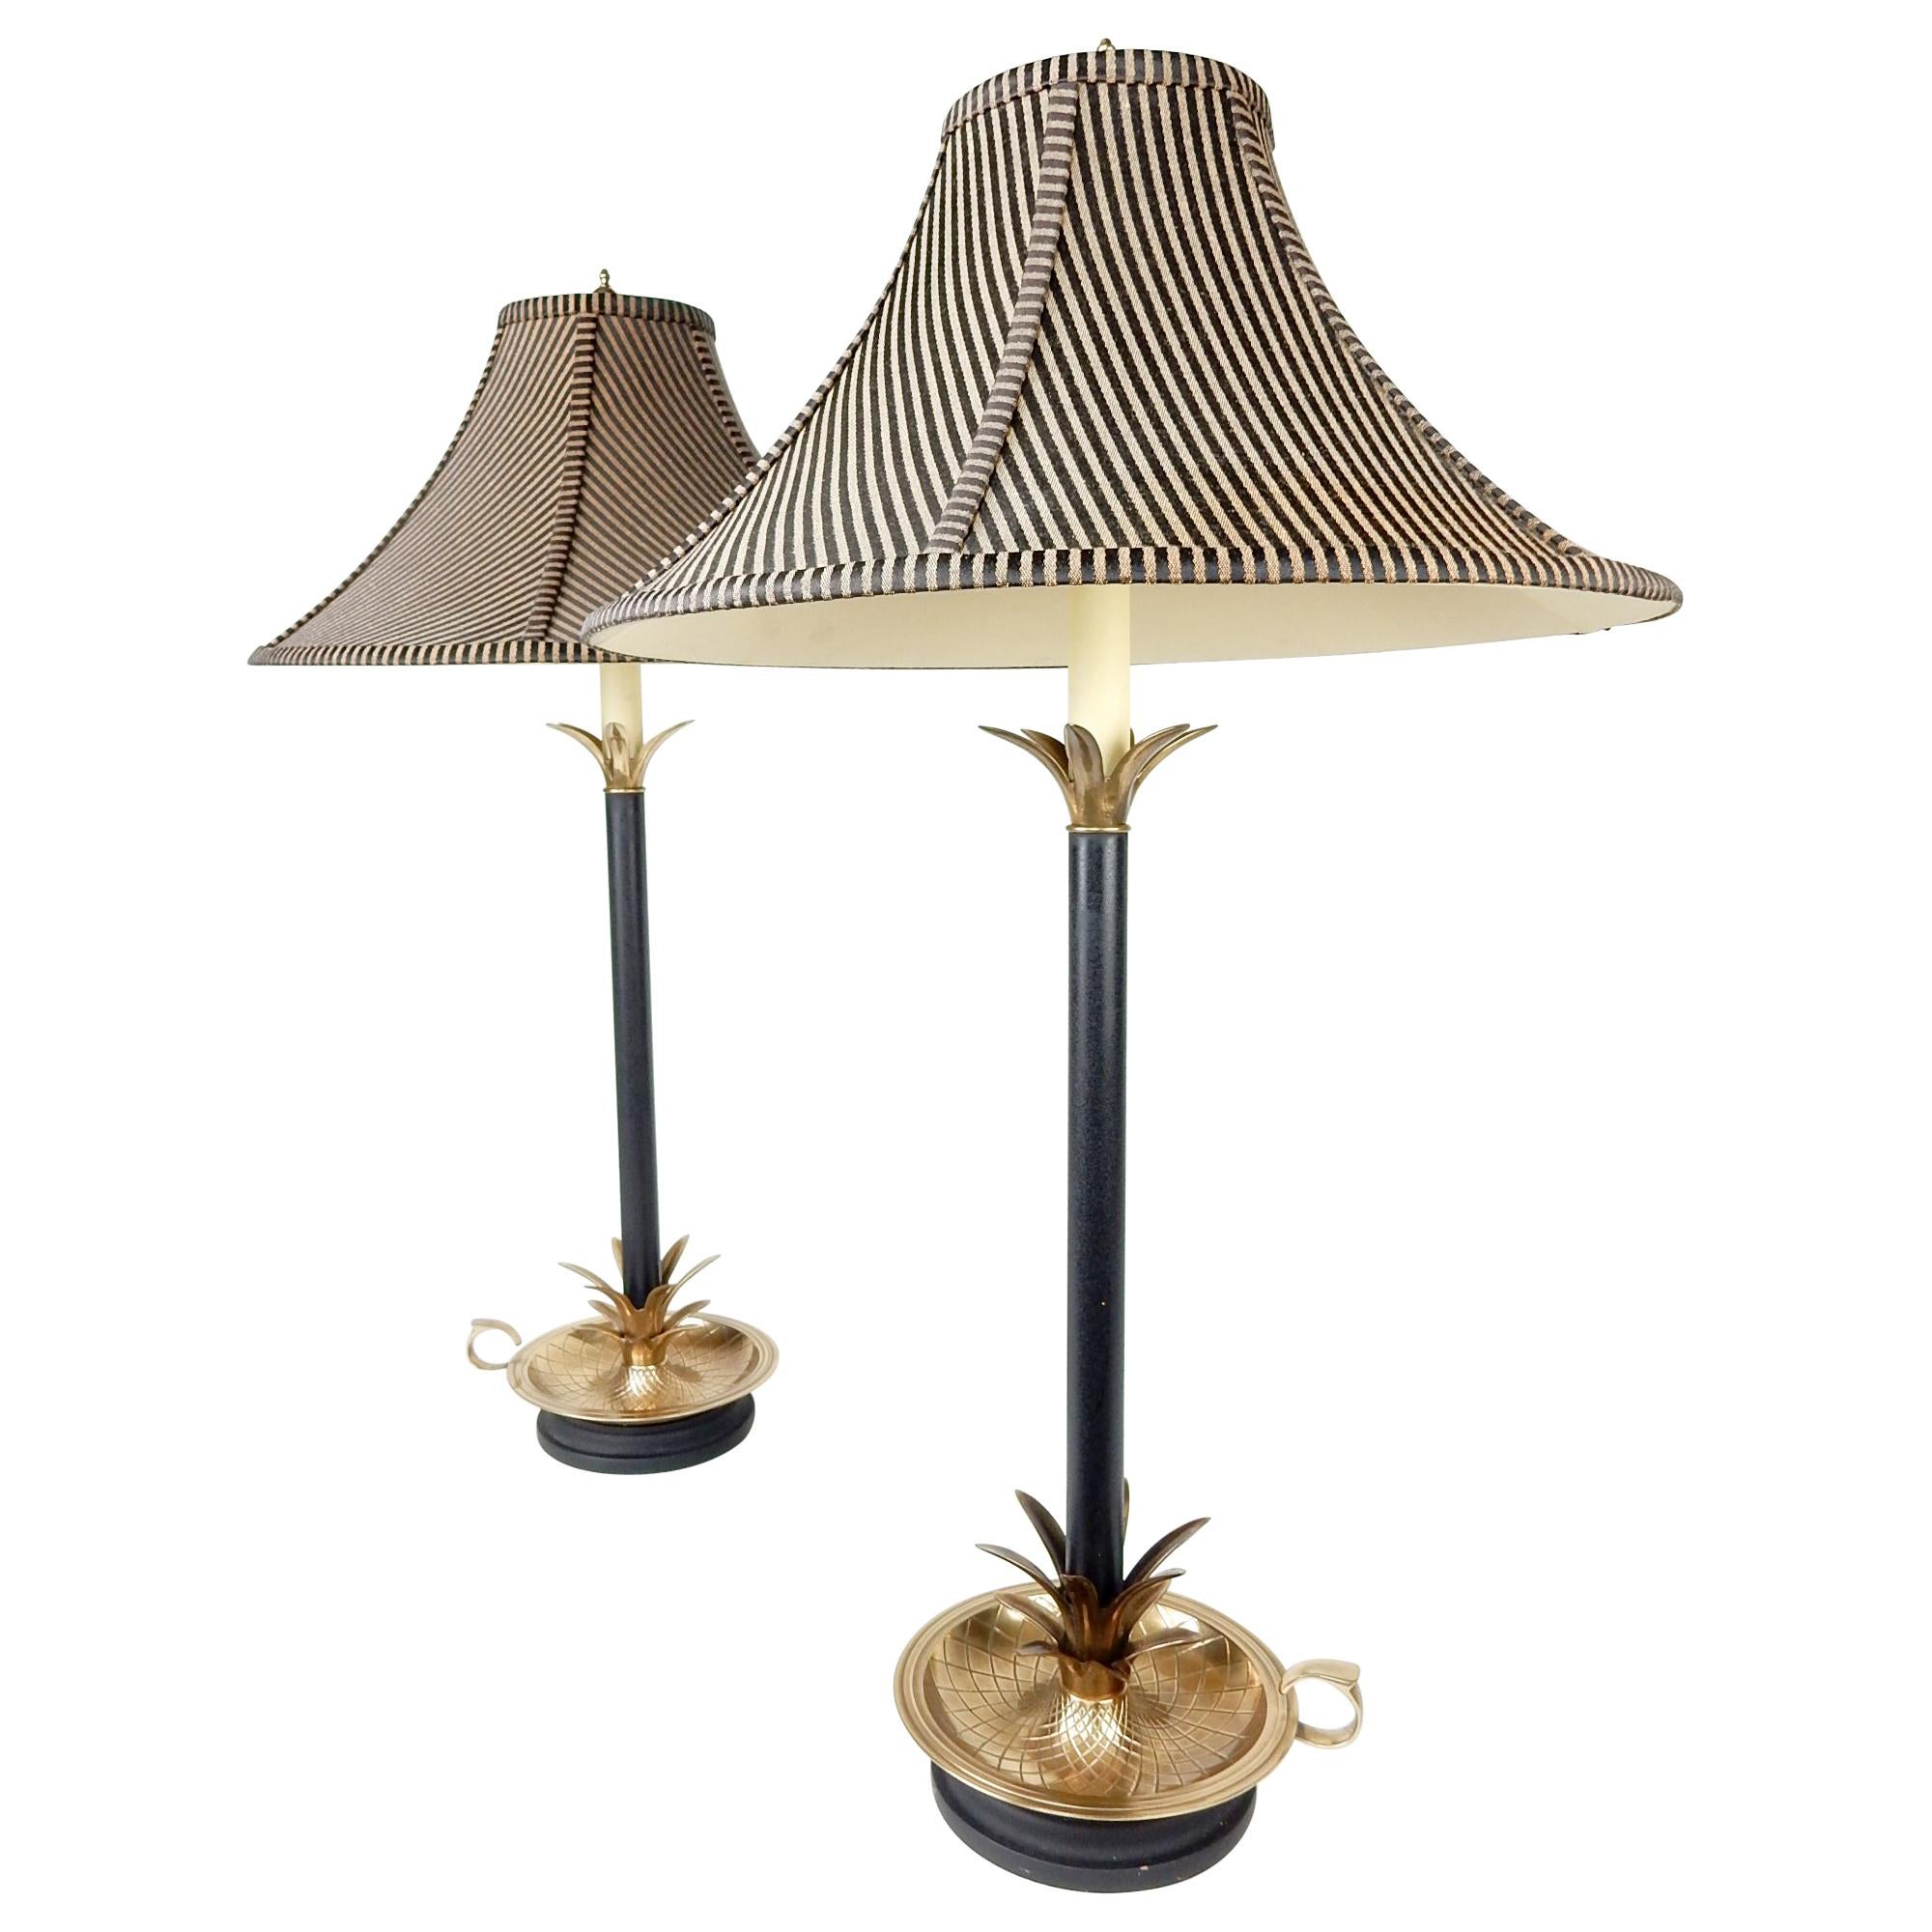 1970s Frederick Cooper Brass Pineapple Table Lamps